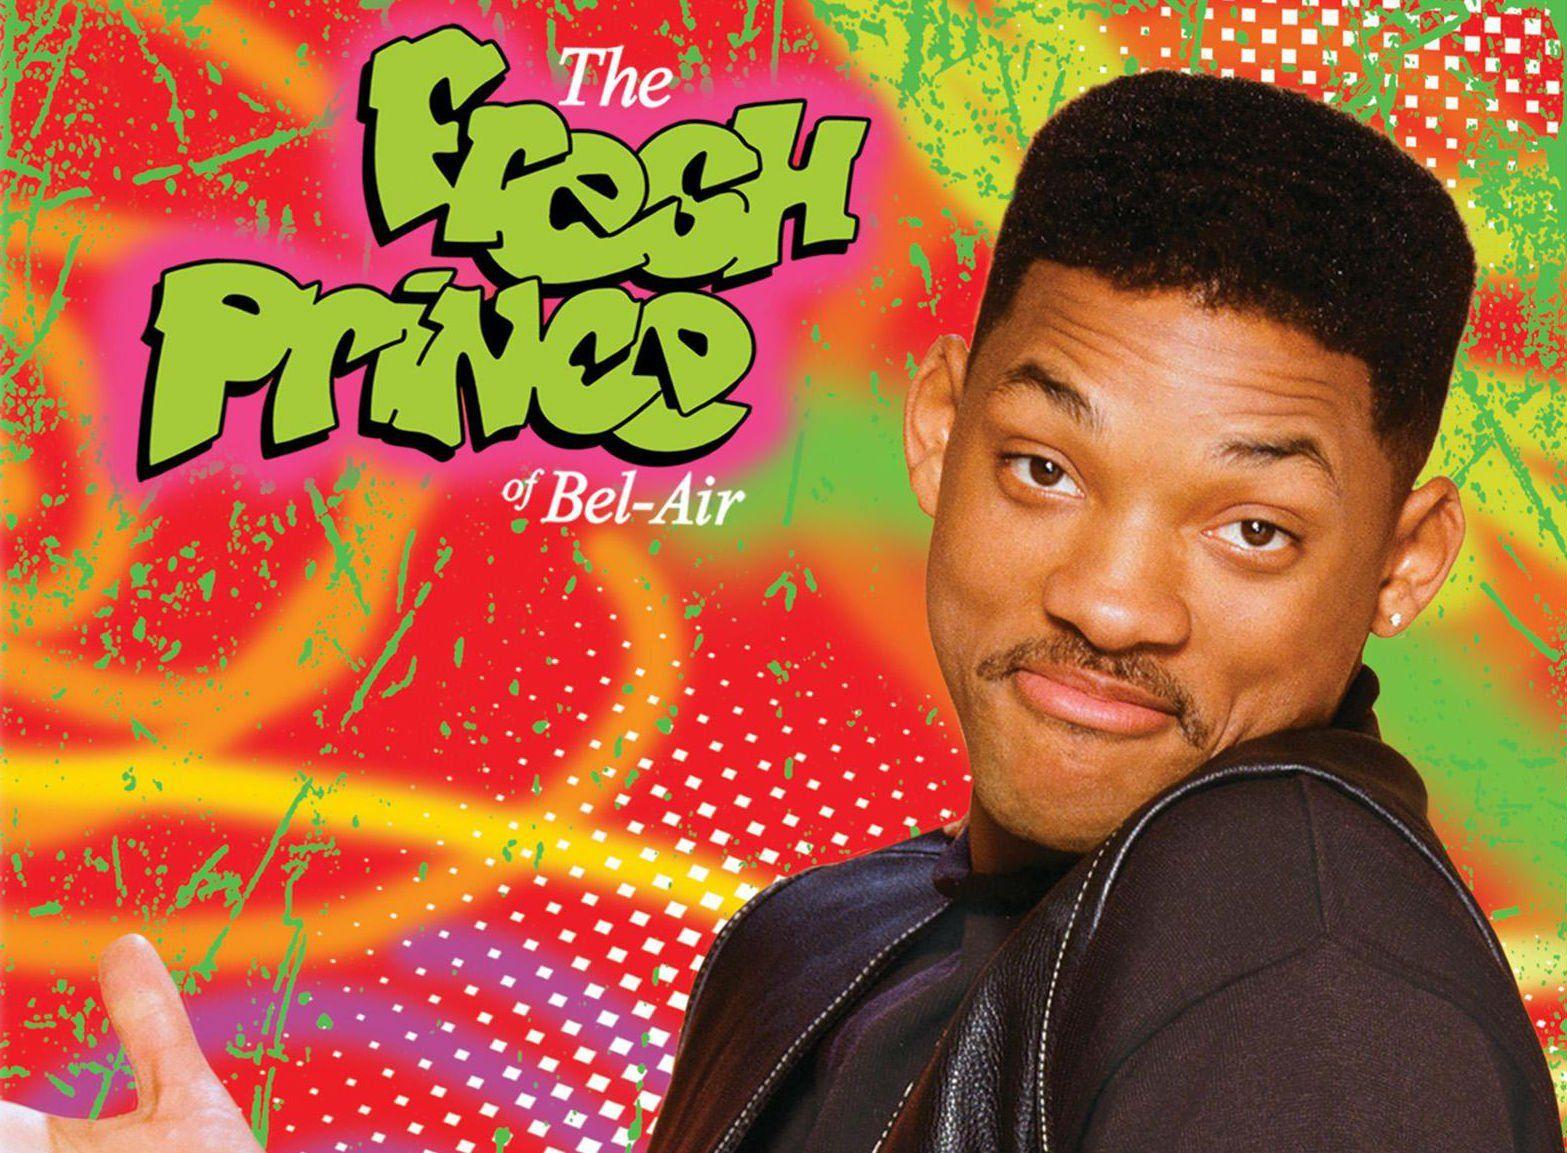 The Fresh Prince Of Bel Air Image FPOBA 04 HD Wallpaper